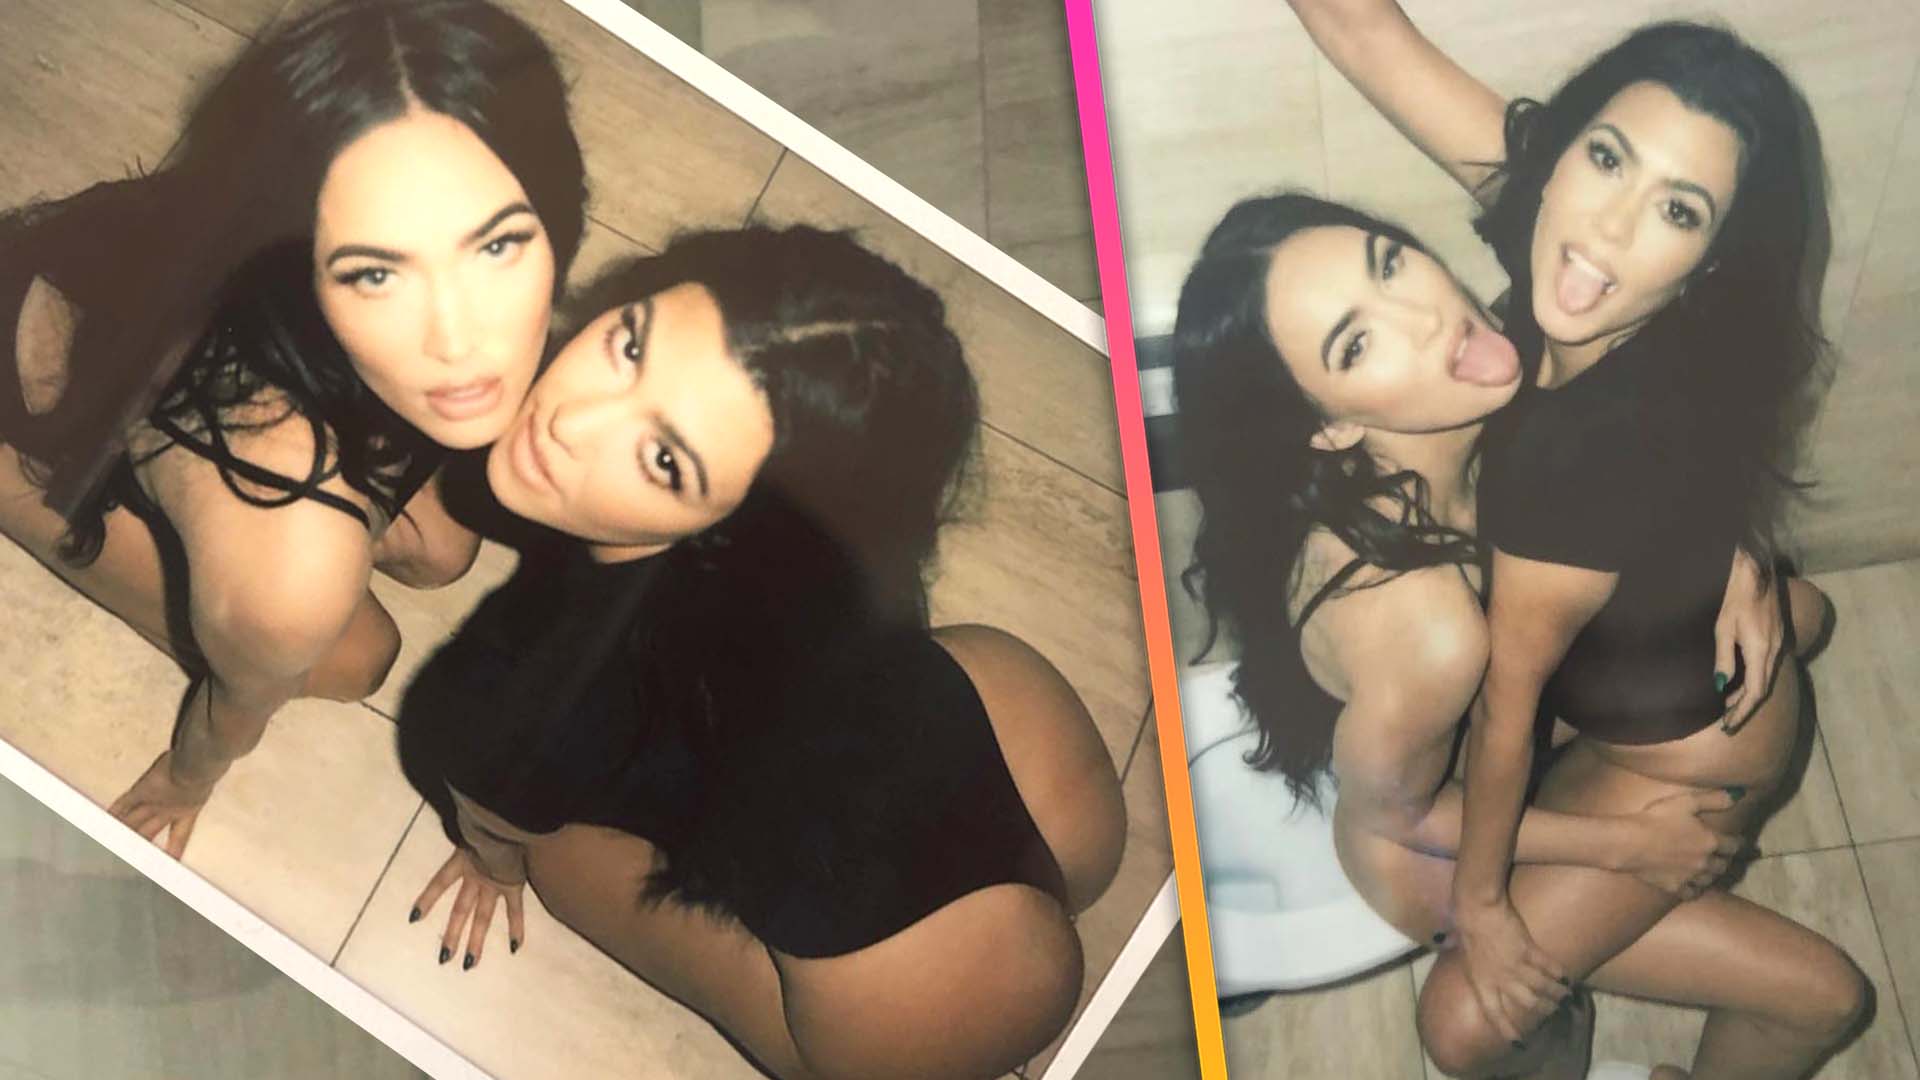 Megan Fox Shares Sexy Pics of Her and Kourtney Kardashian Should We Start an OnlyFans? Entertainment Tonight photo